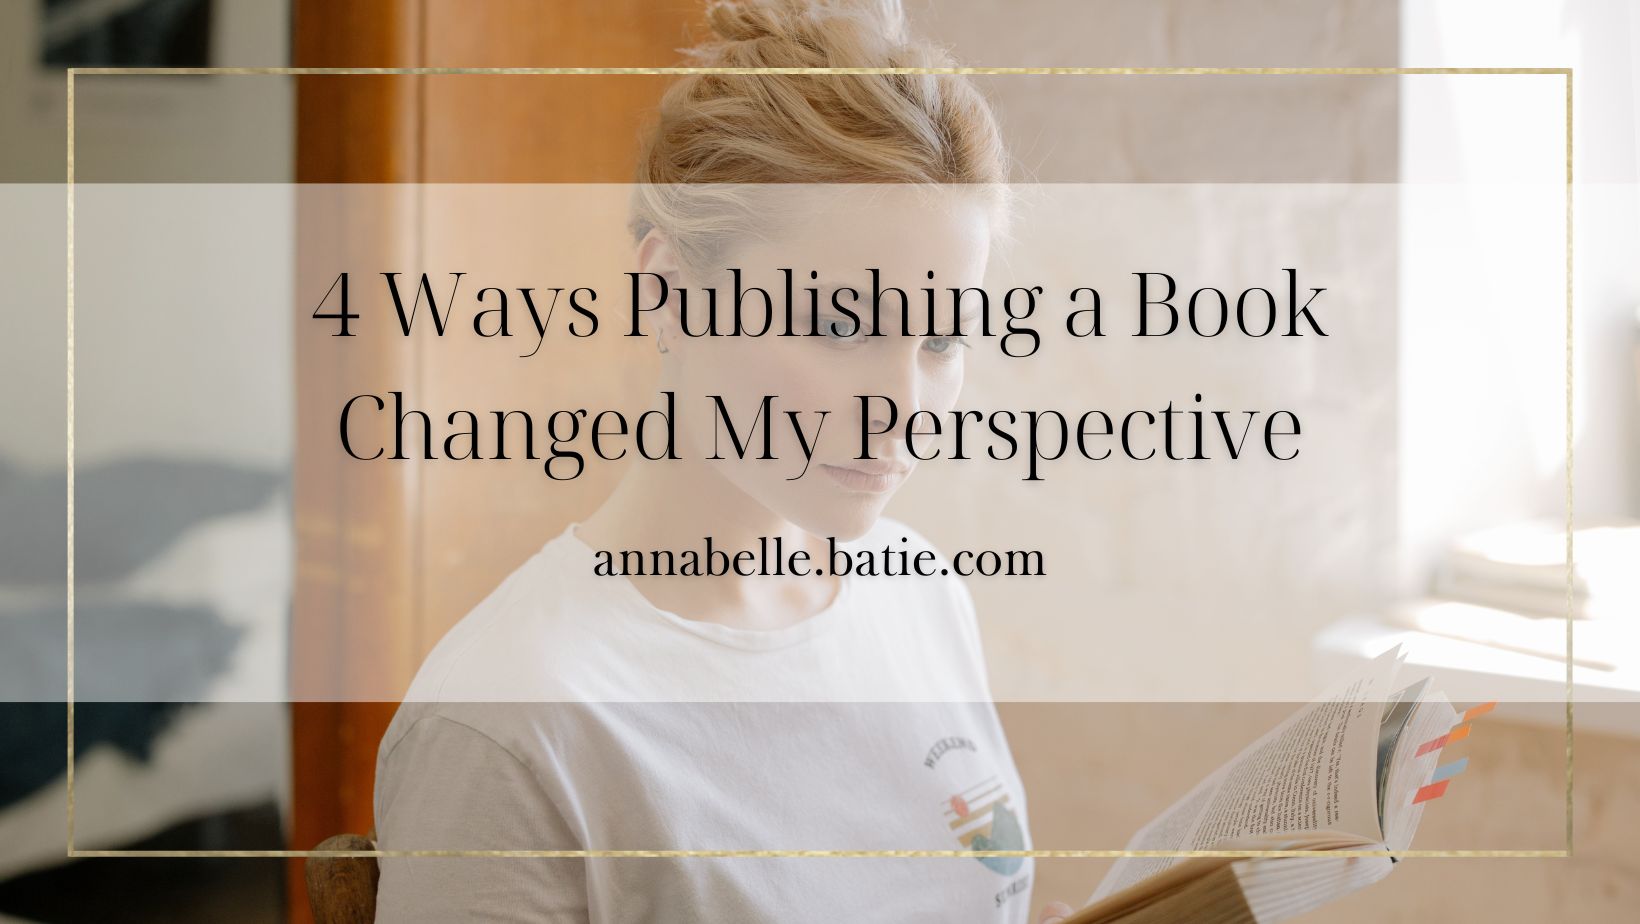 4 Ways Publishing a Book Changed My Perspective